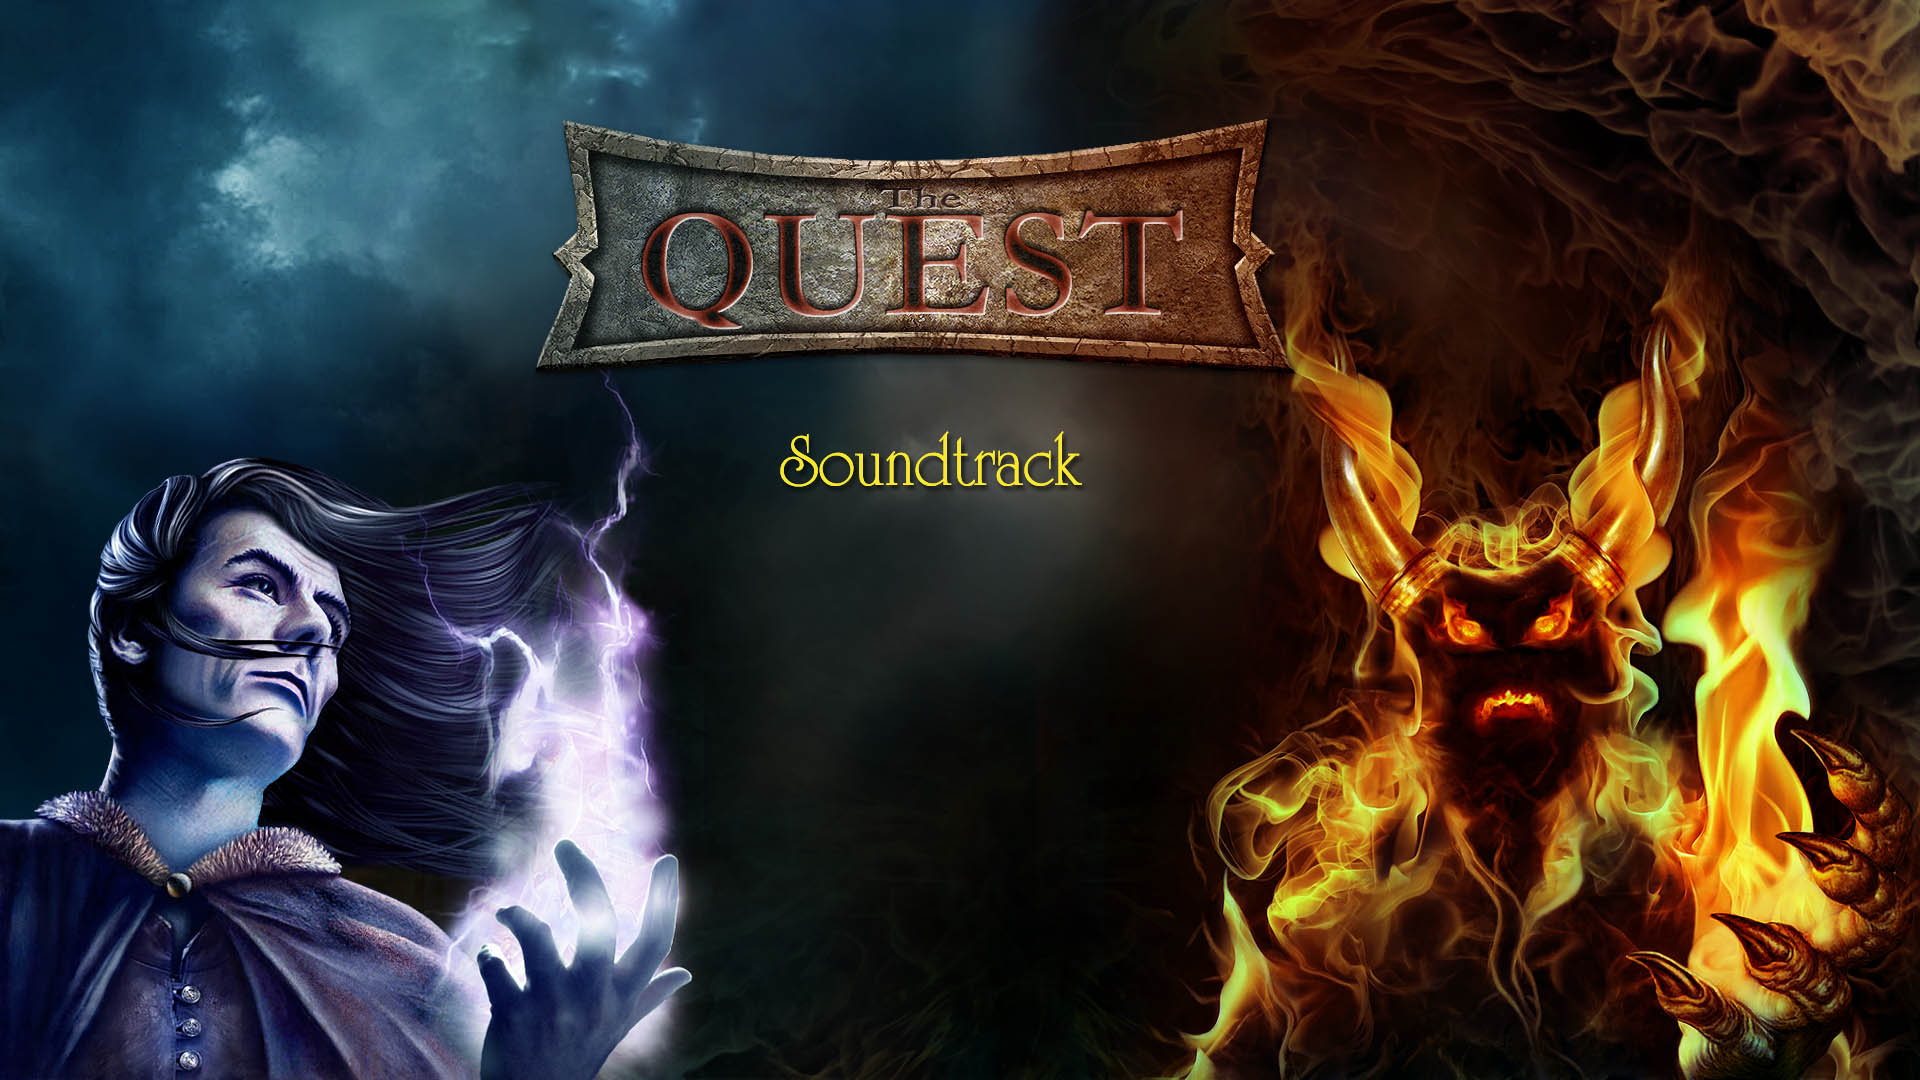 The Quest - Soundtrack Featured Screenshot #1